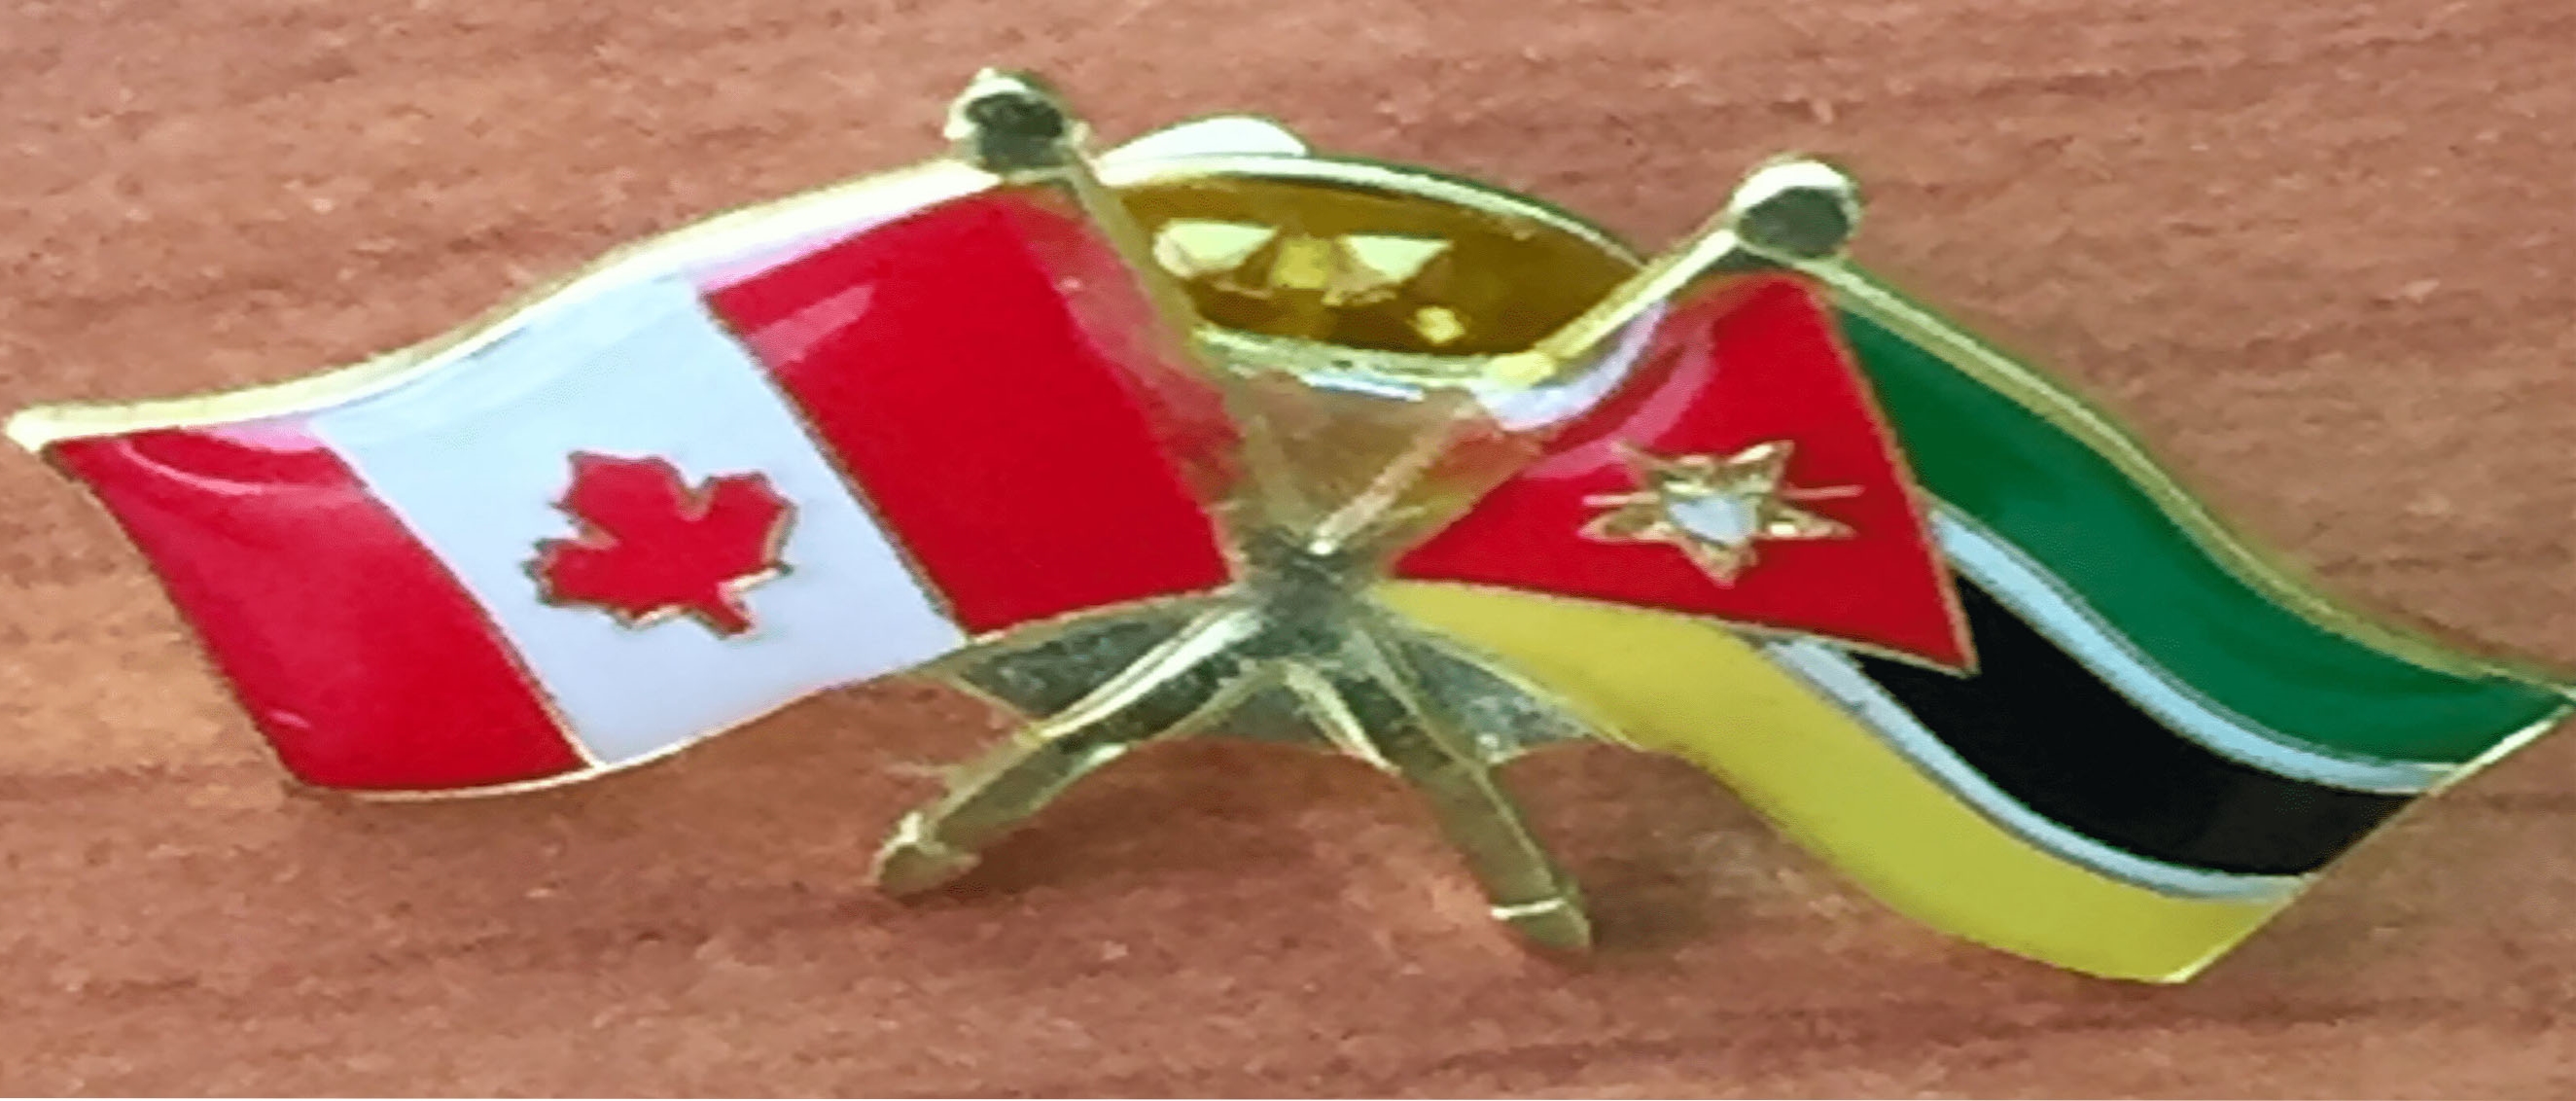 A pin depicting the flags of Canada and Mozambique side-by-side